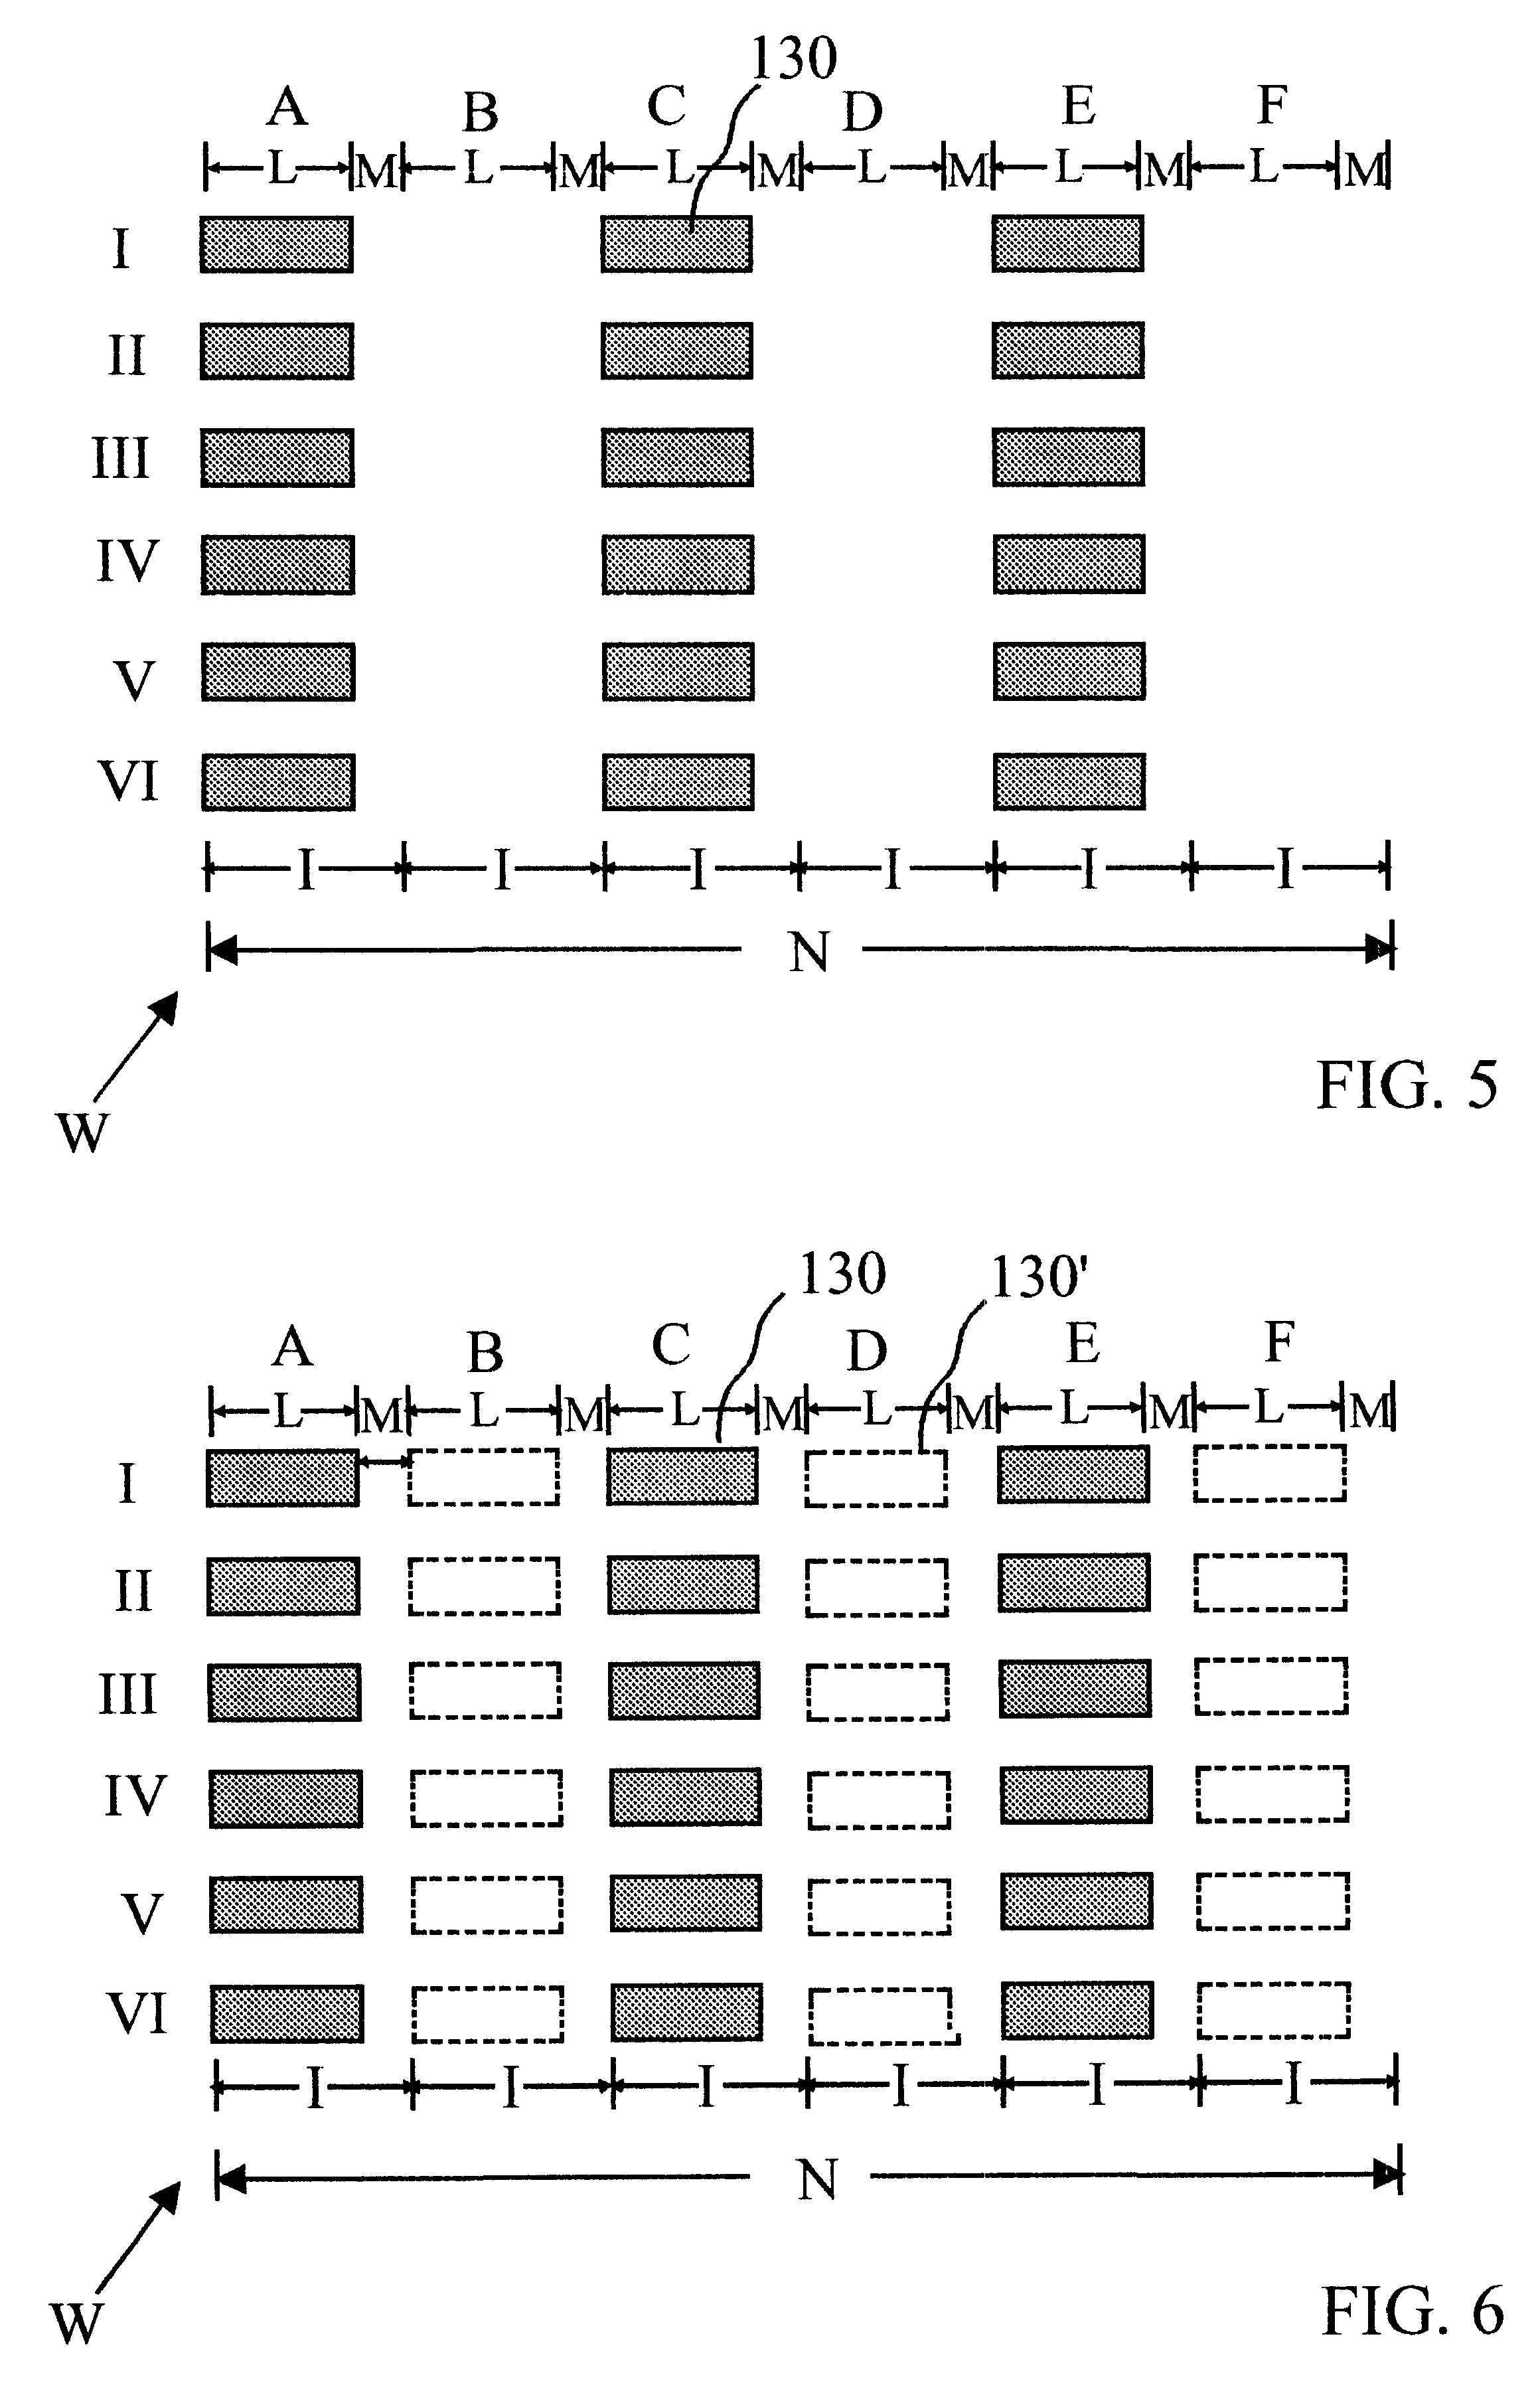 Plural interleaved exposure process for increased feature aspect ratio in dense arrays